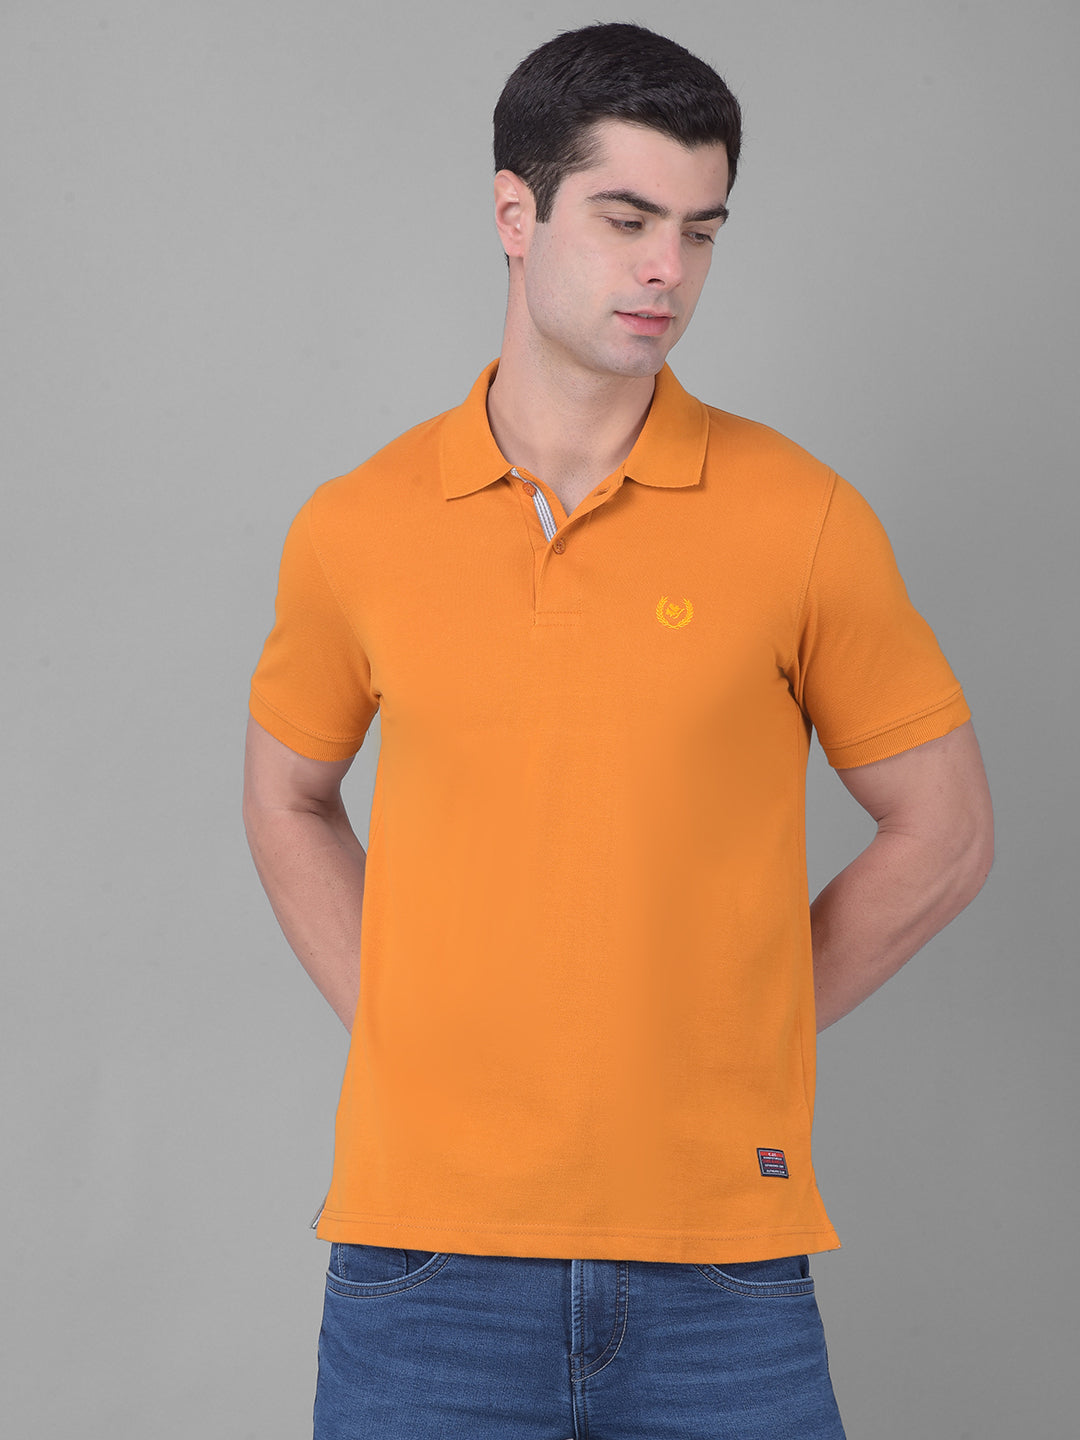 cobb solid fire yellow polo neck t-shirt